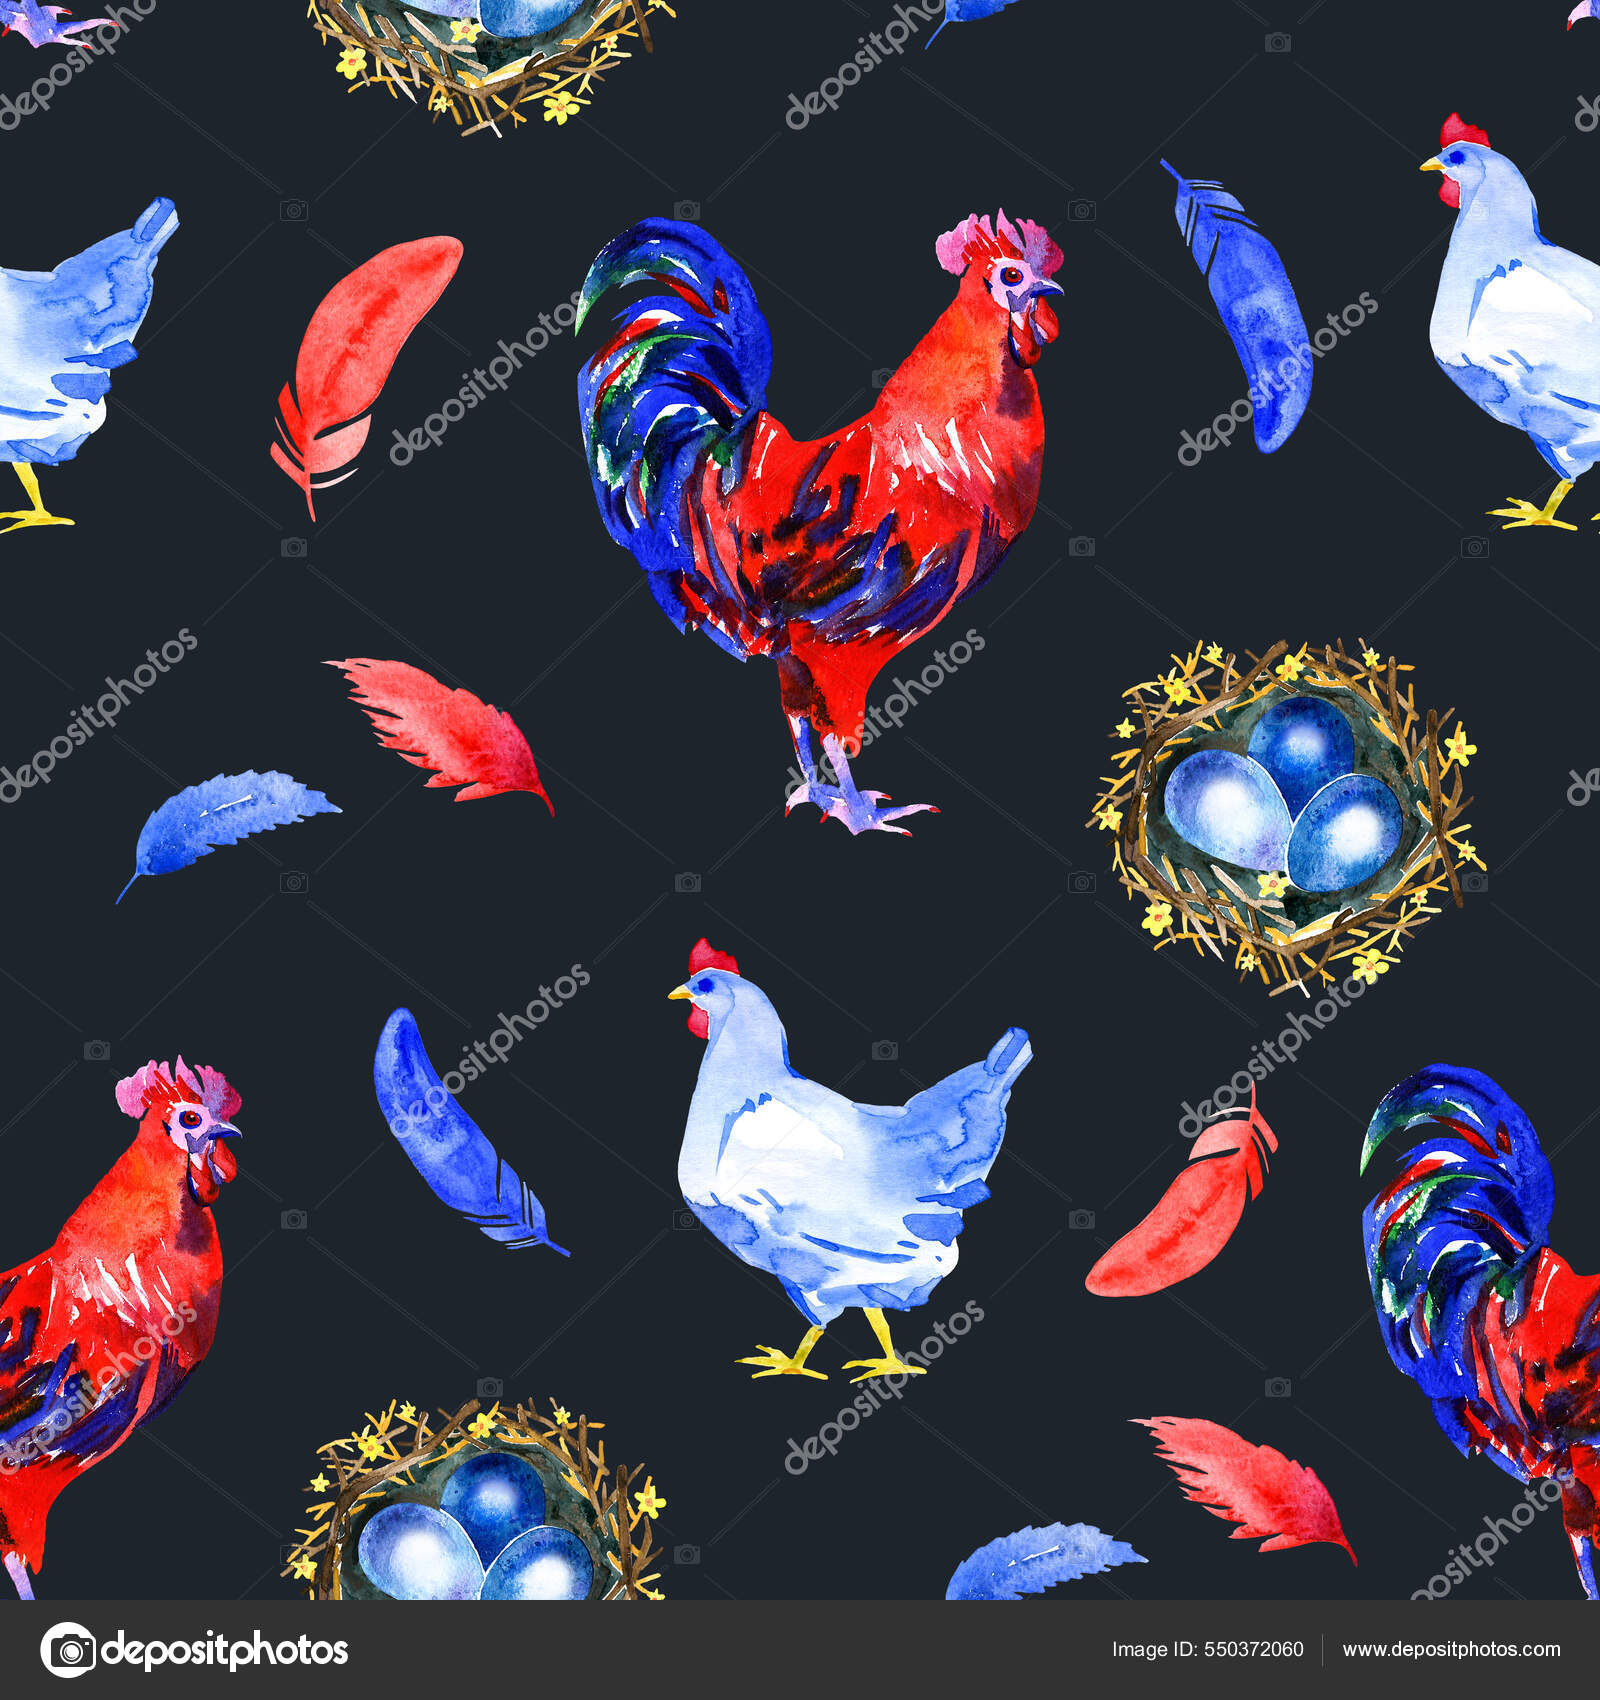 Chickens seamless pattern INSTANT DOWNLOAD background